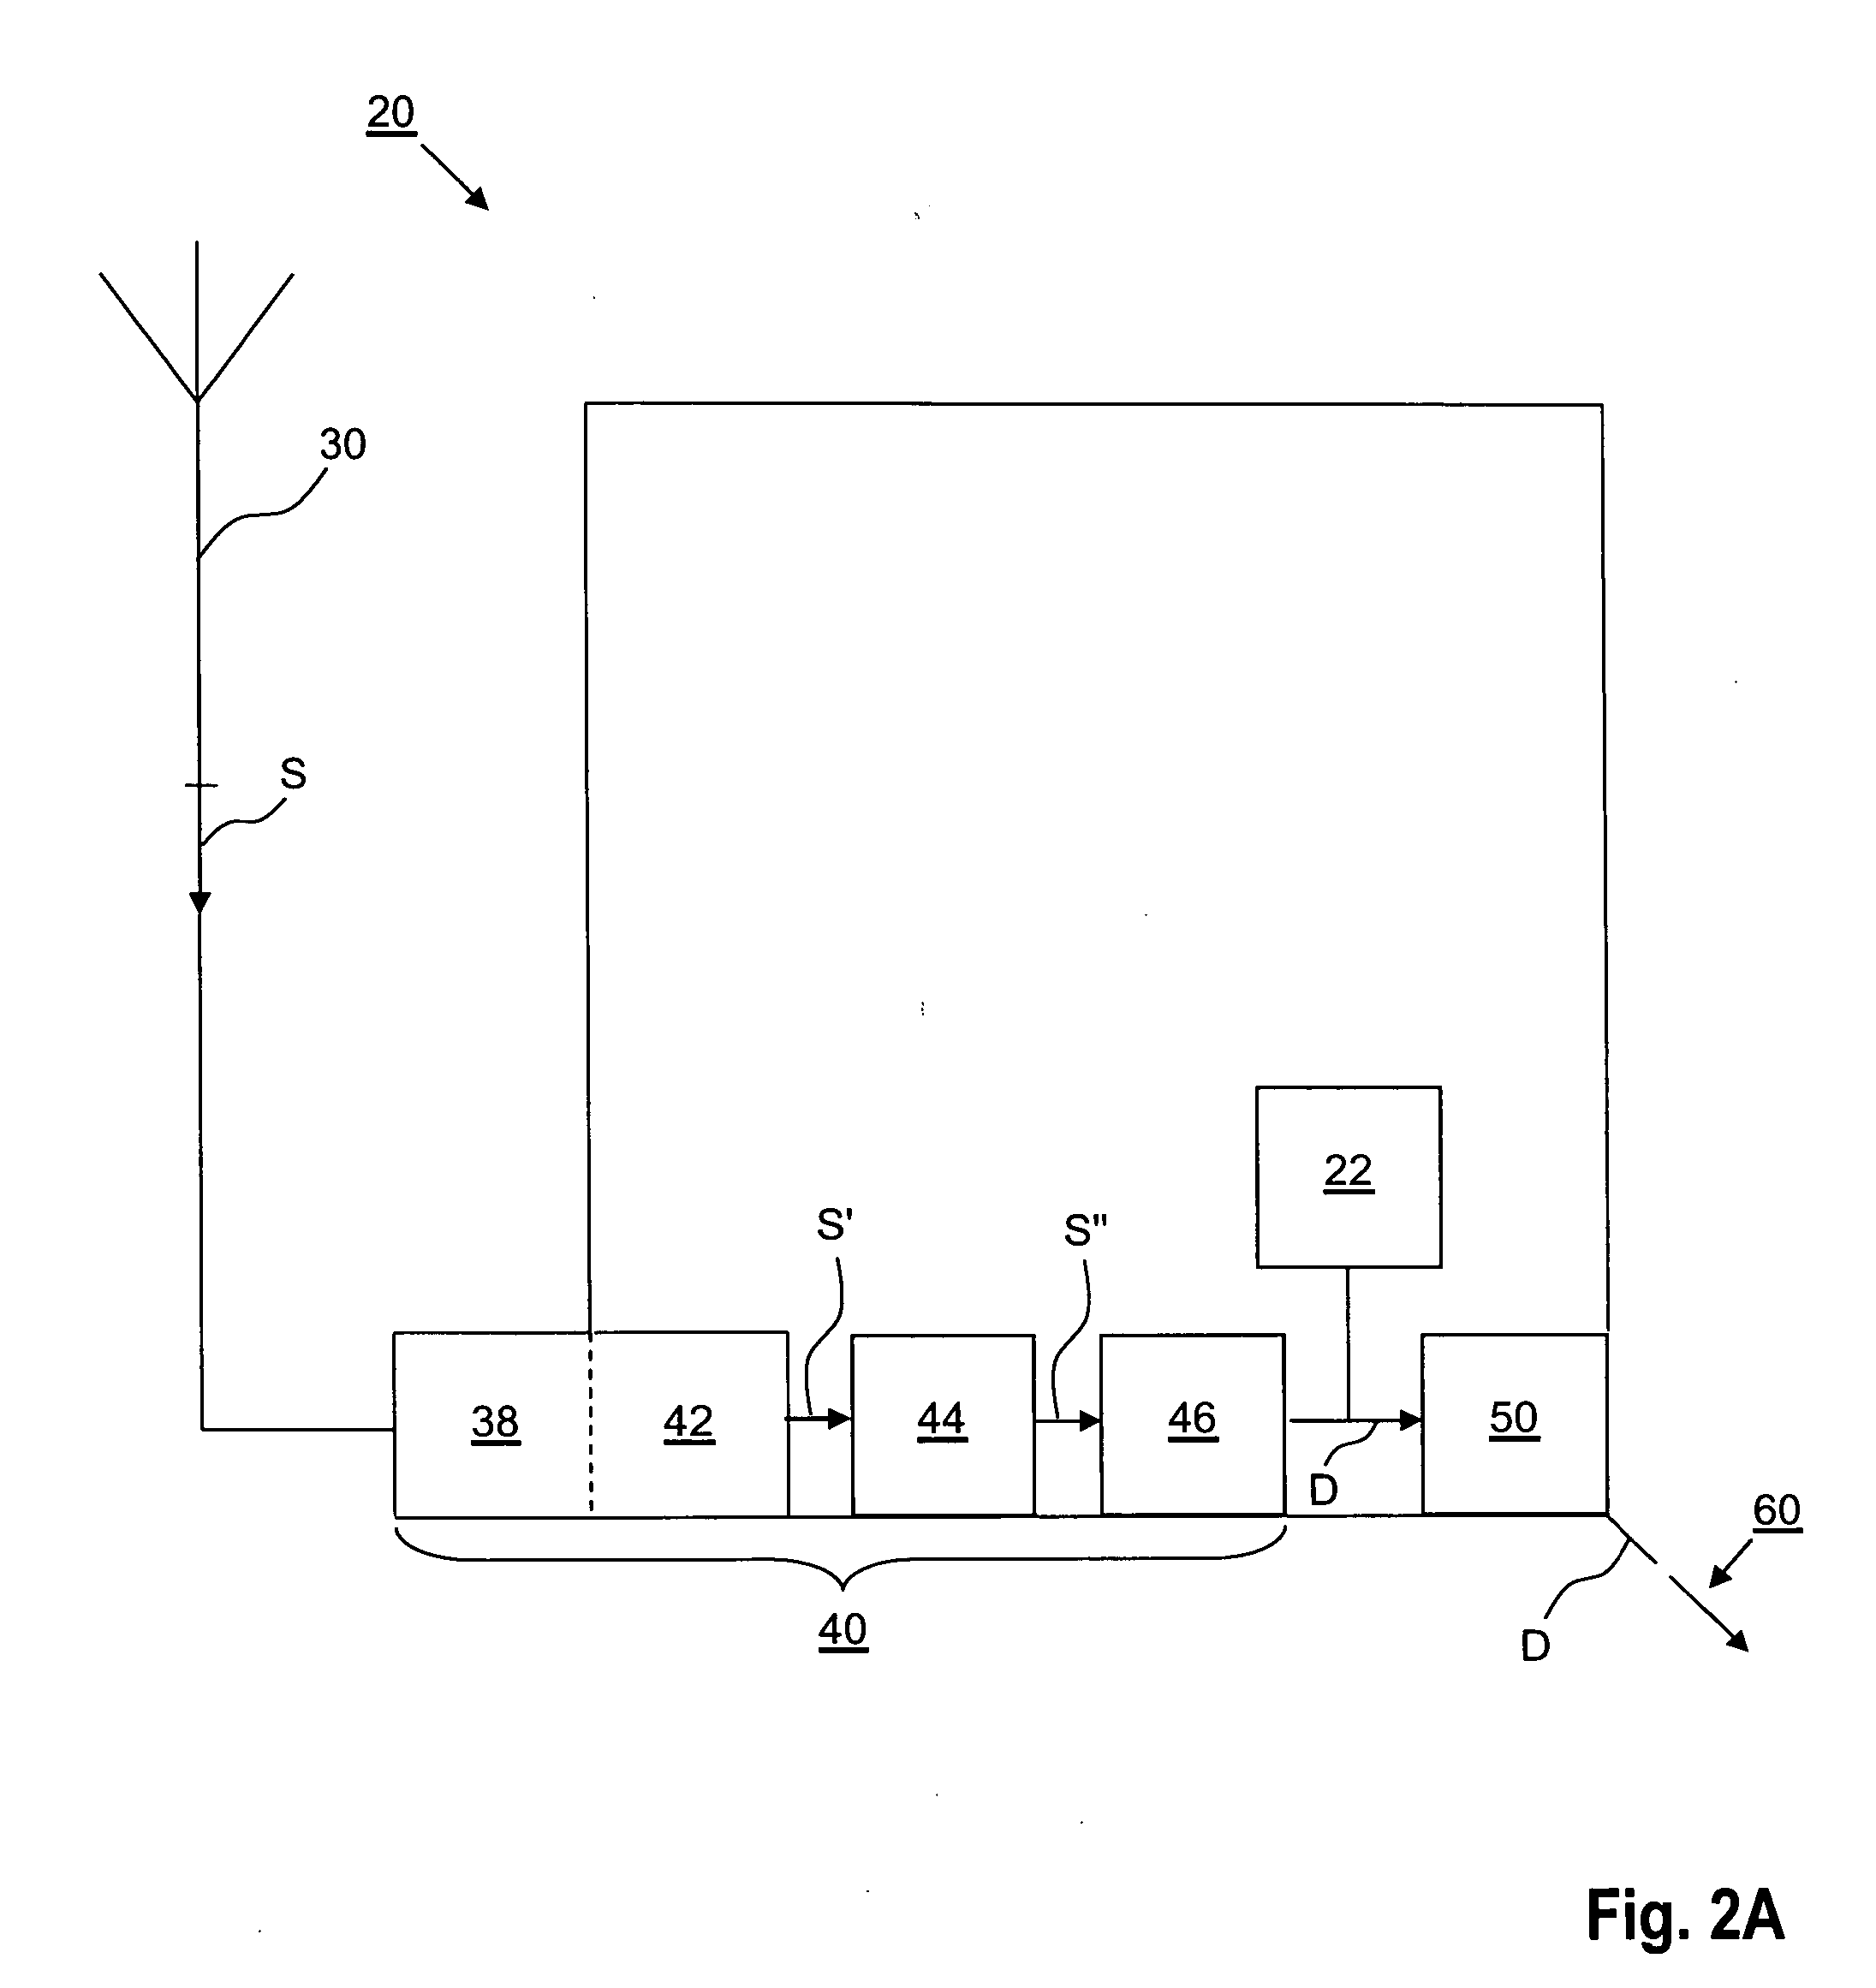 System and method for recording, transmitting and analyzing data and information accrued from electromagnetic radiation